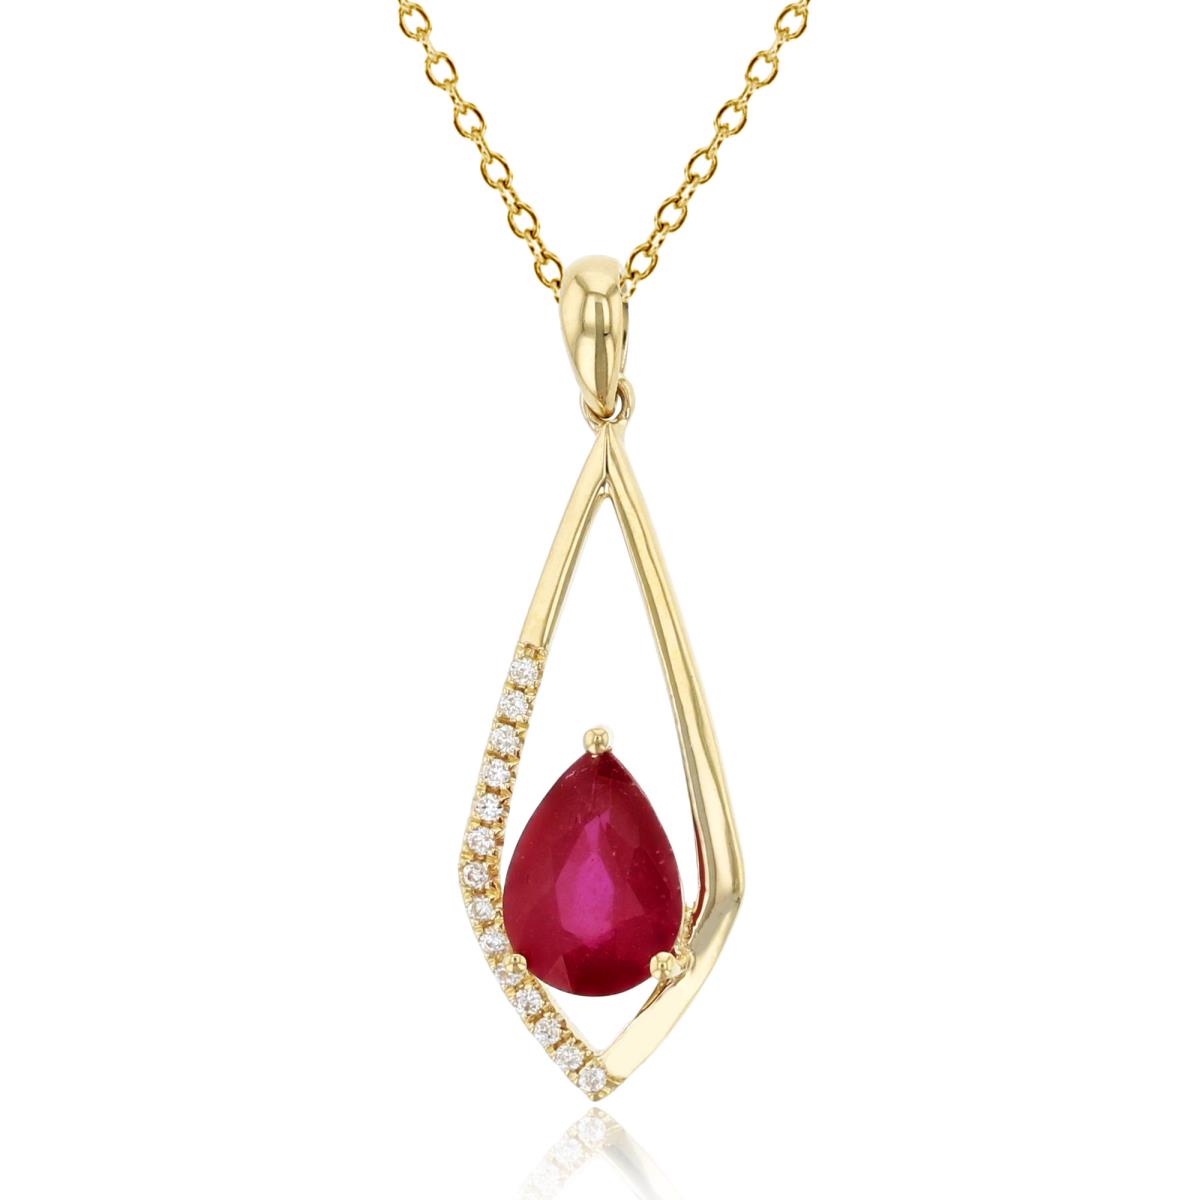 14K Yellow Gold 0.042cttw Rnd Diamonds & 7x5mm PS Glass Filled Ruby Open Rhomb Dangling 18"Necklace